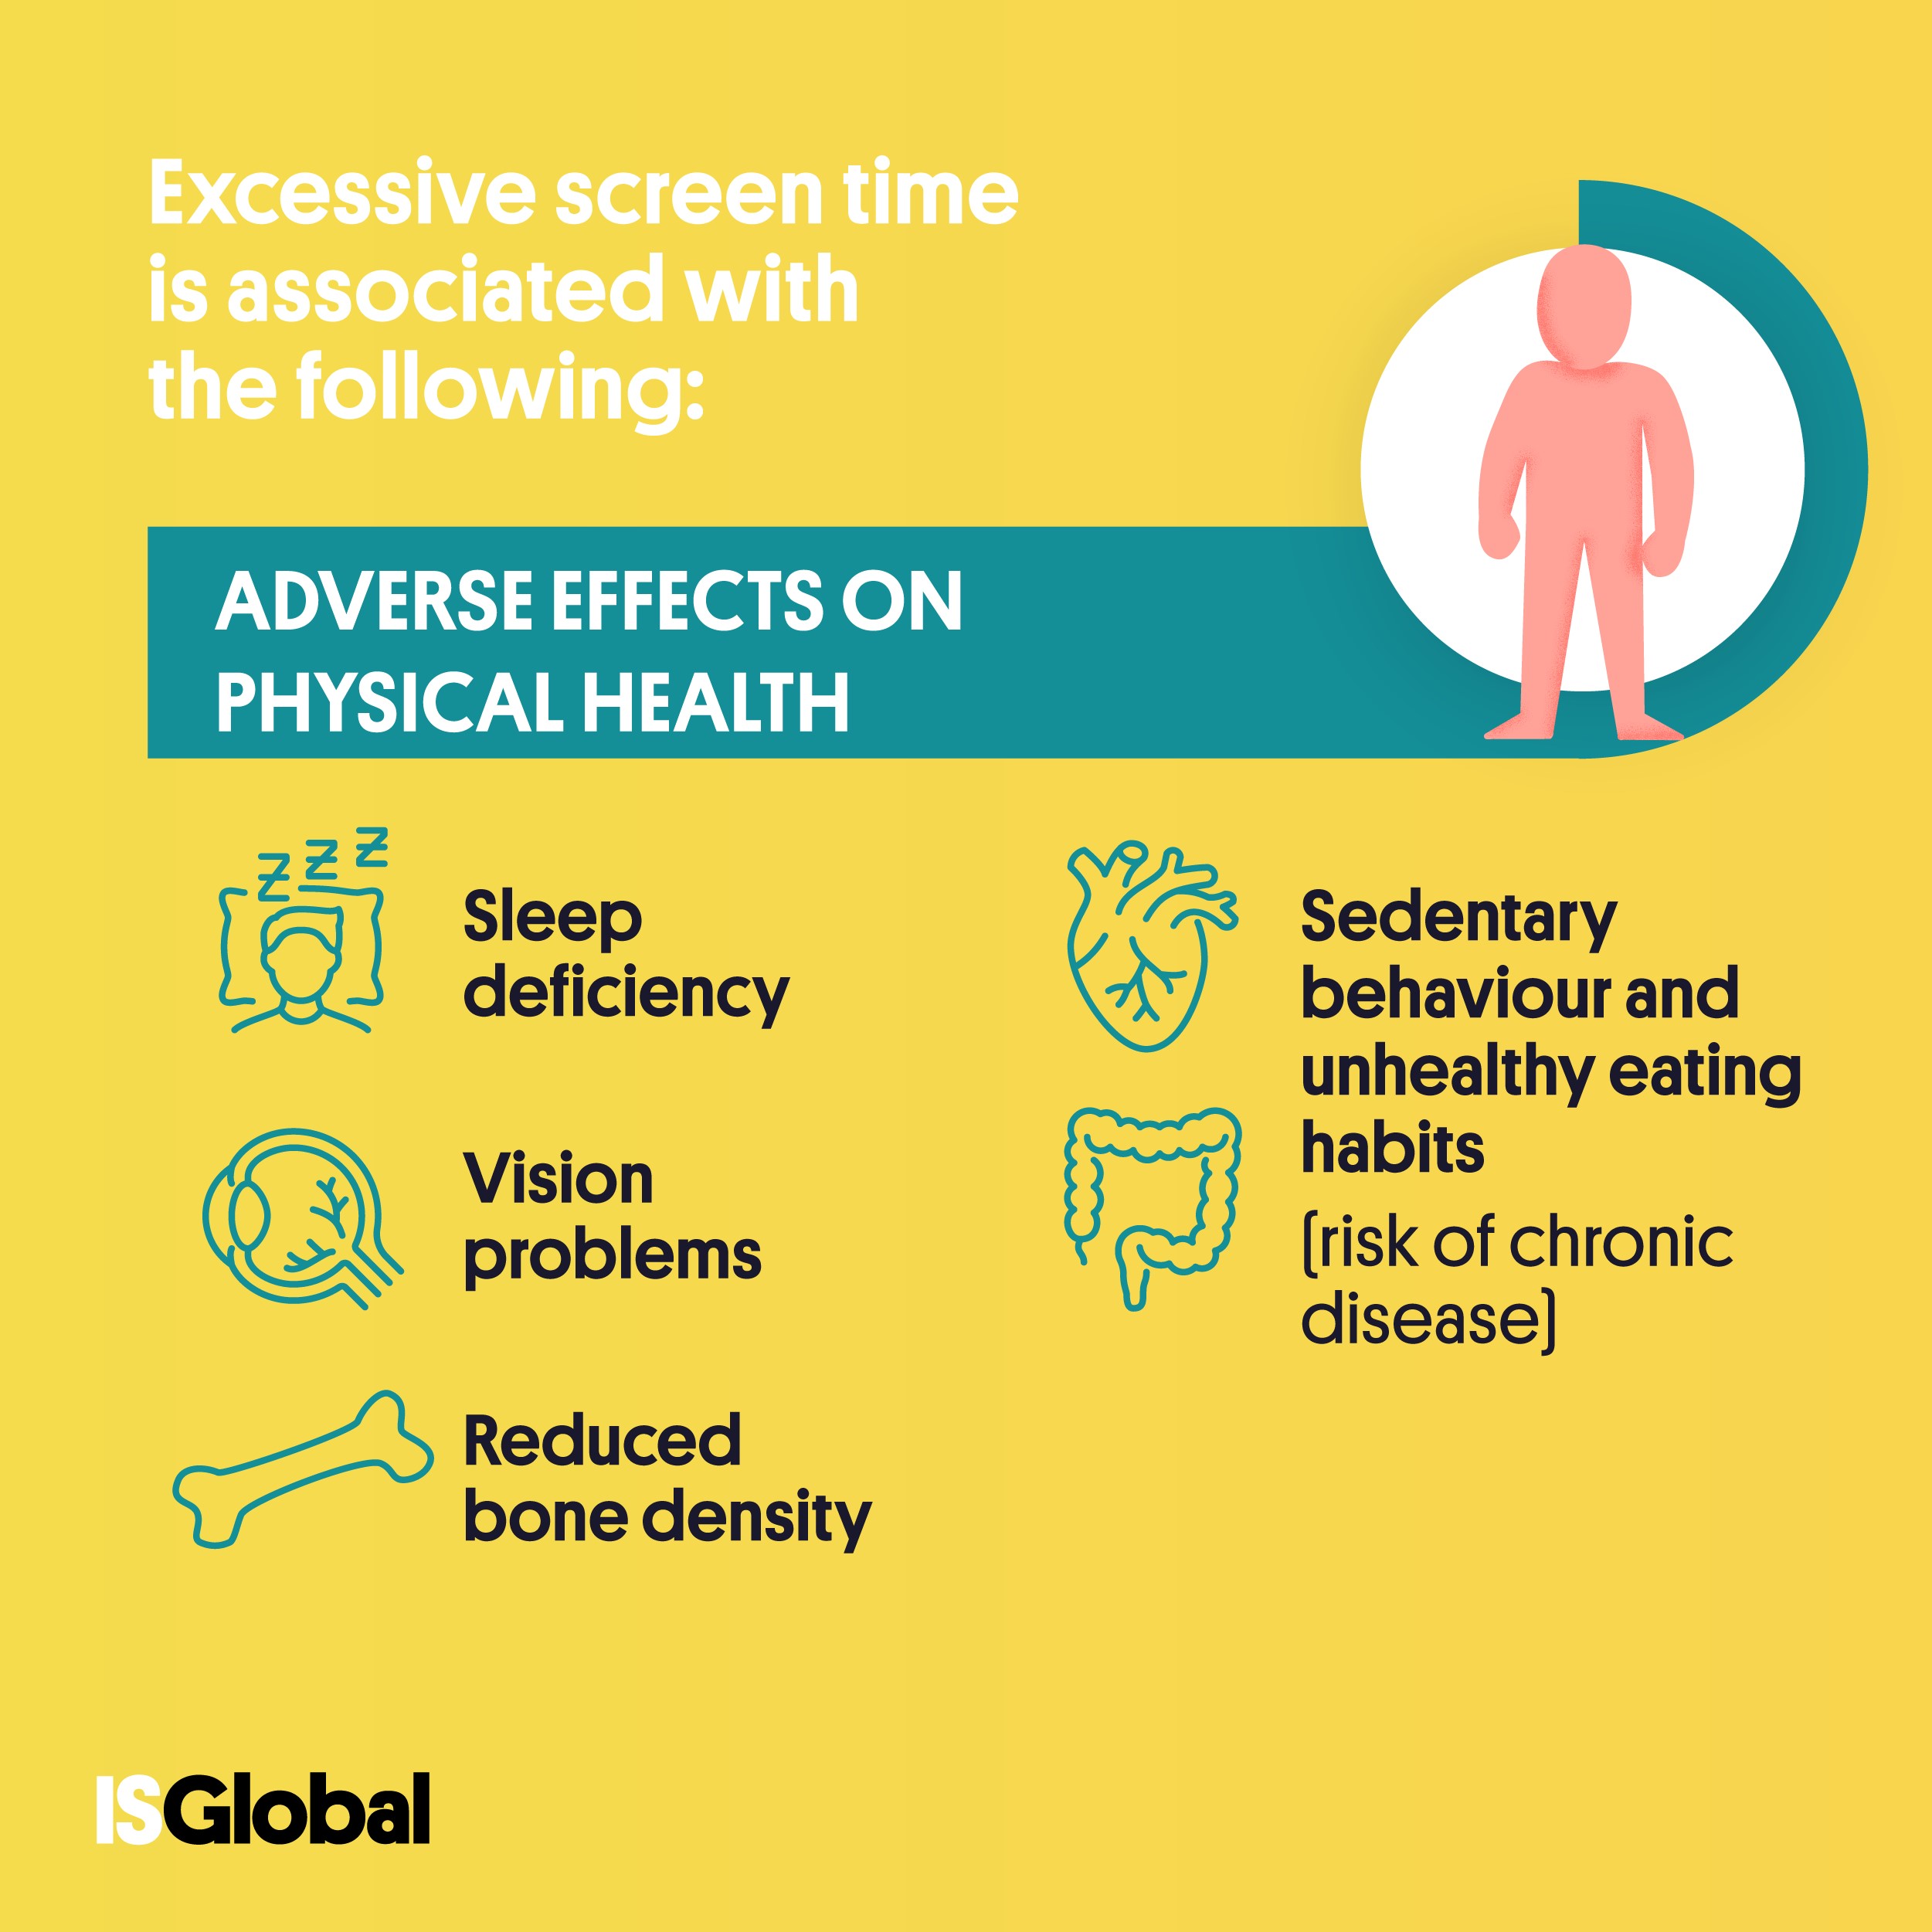 Effects of screen time on physical health